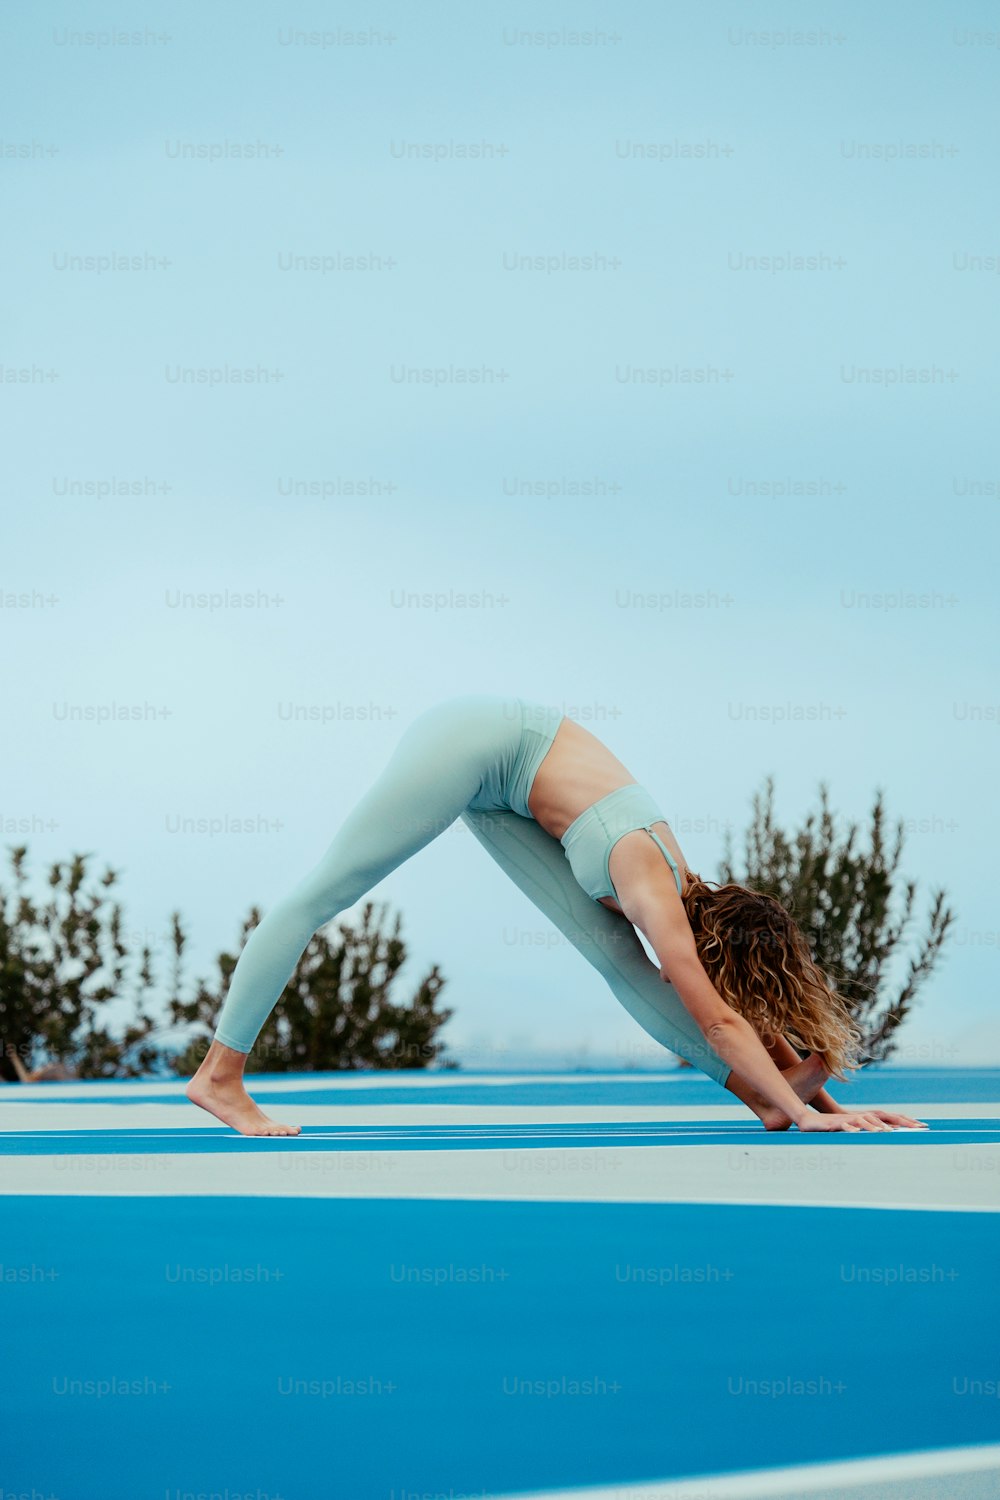 a woman doing a handstand on a blue surface